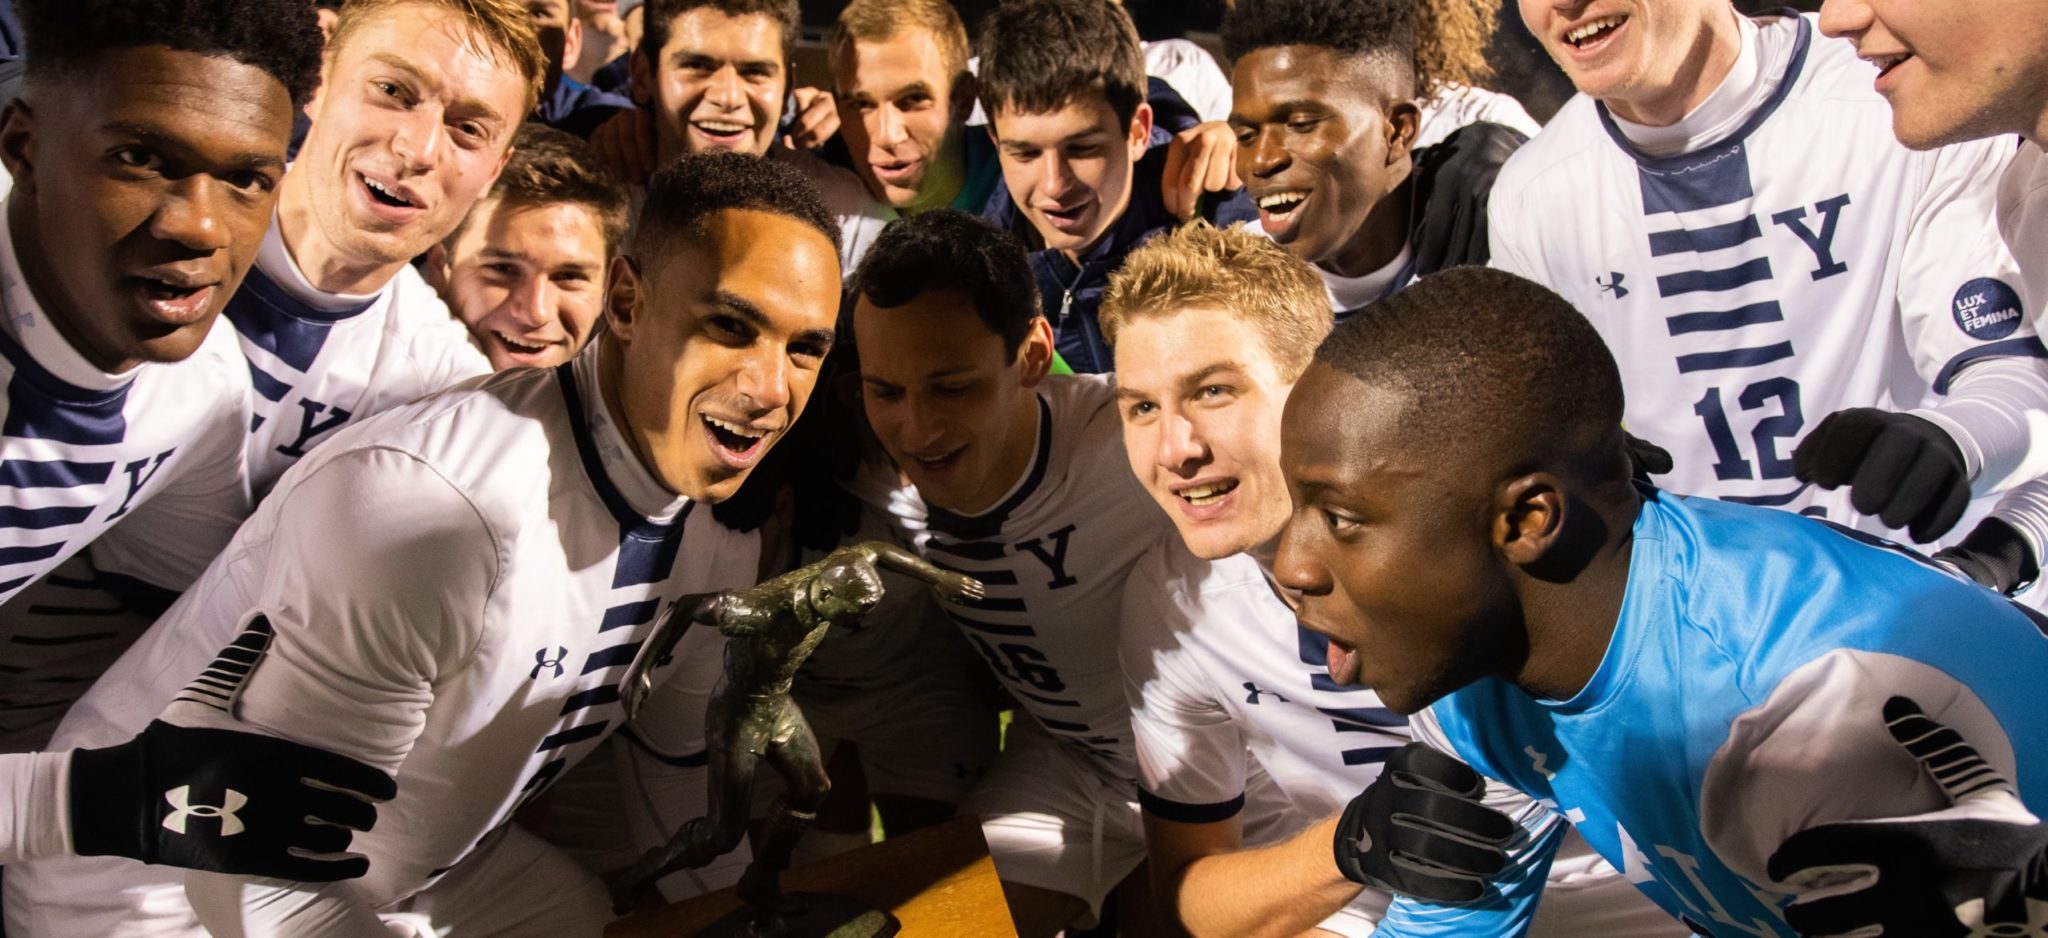 MEN’S SOCCER NCAA Tournament berth, outright Ivy title and national